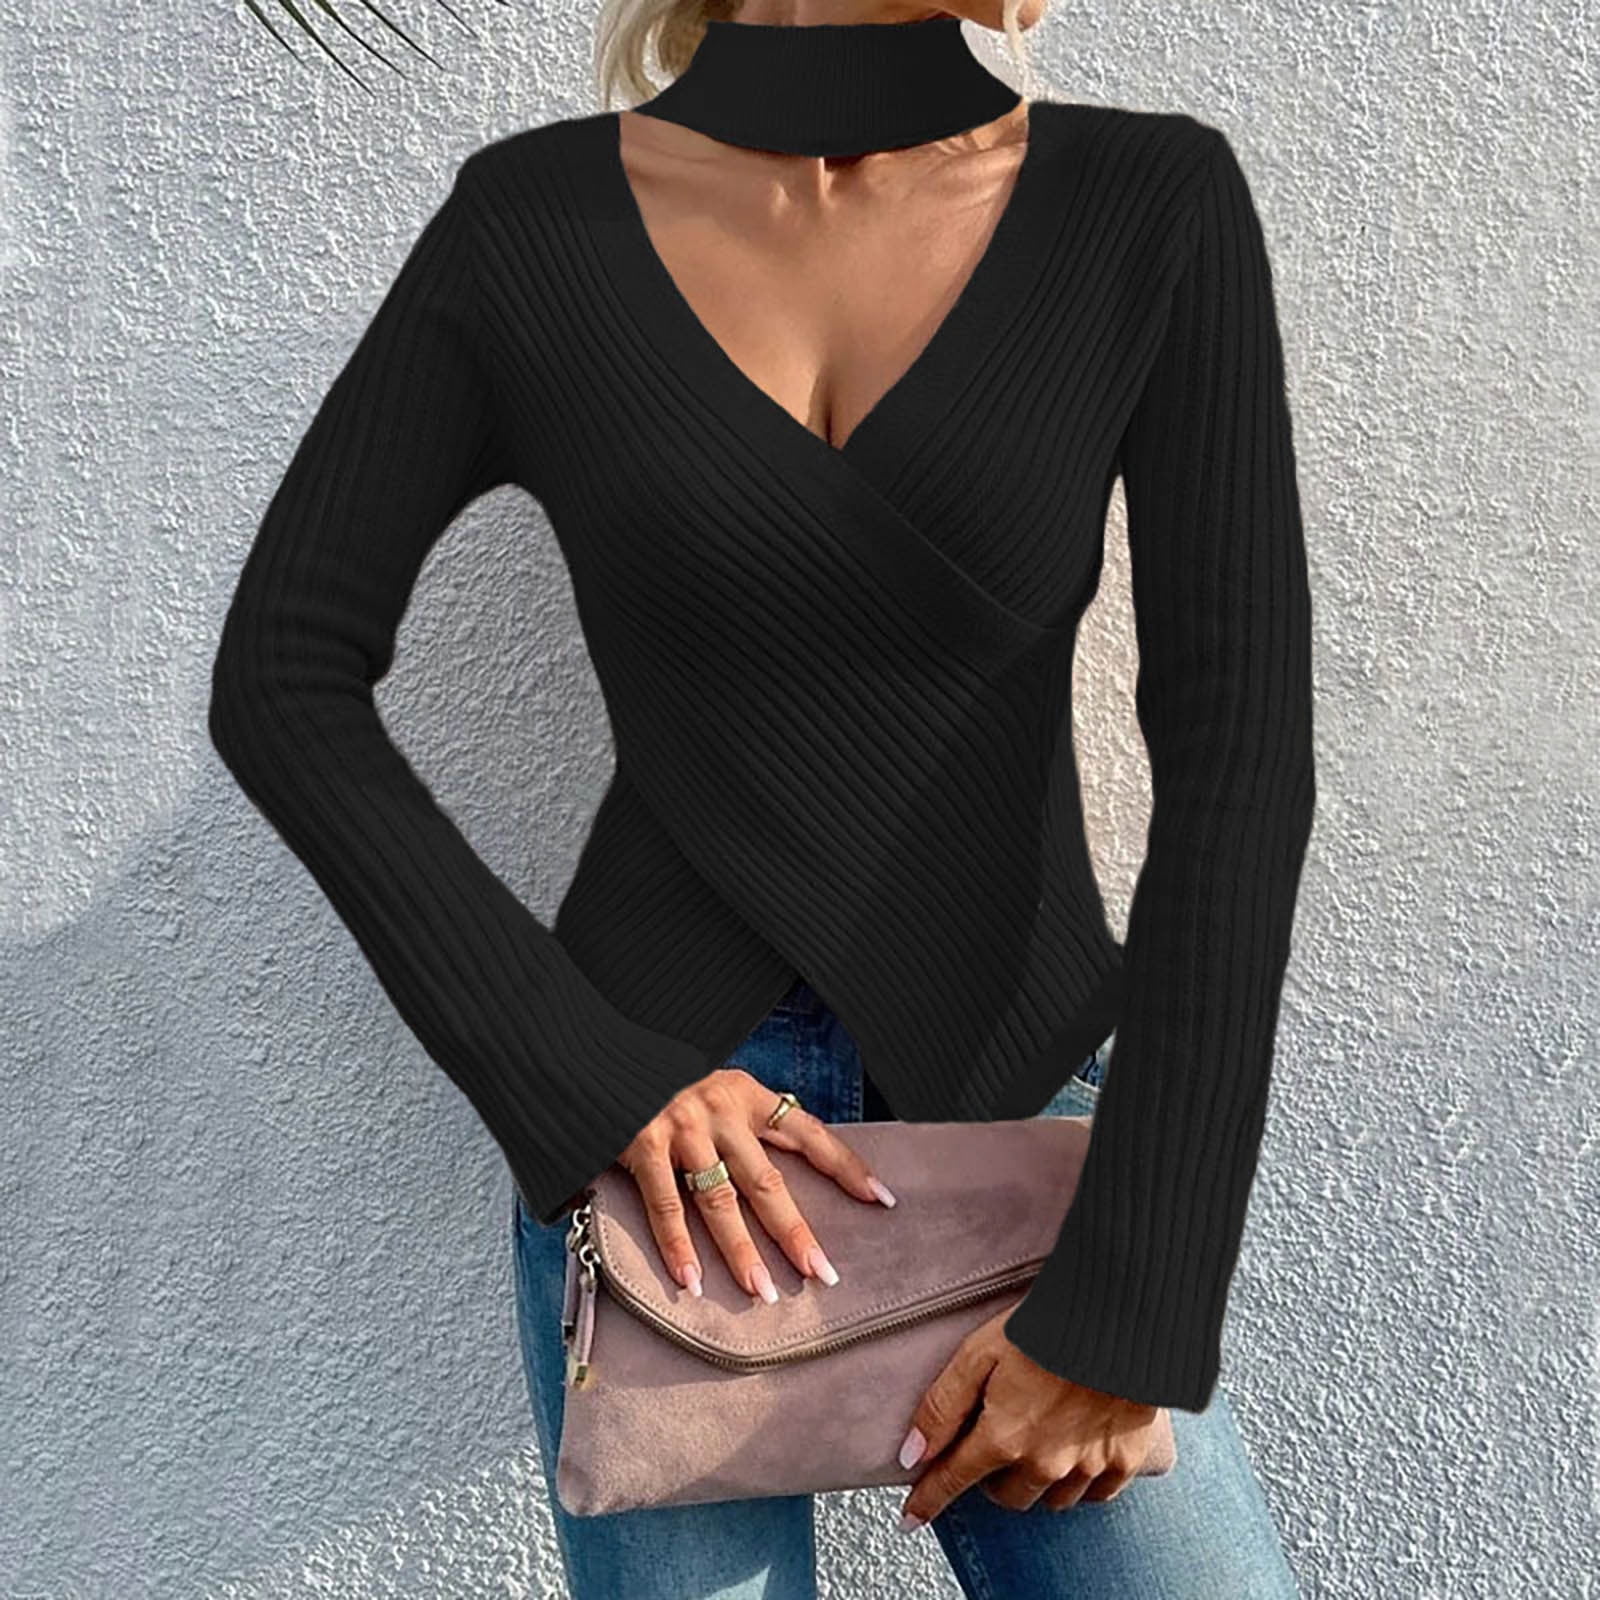 XFLWAM Womens V Neck Criss Cross Wrap Sweaters Halter Long Sleeve Knitted  Tops Slim Fitted Solid Color Choker Blouse Beige M